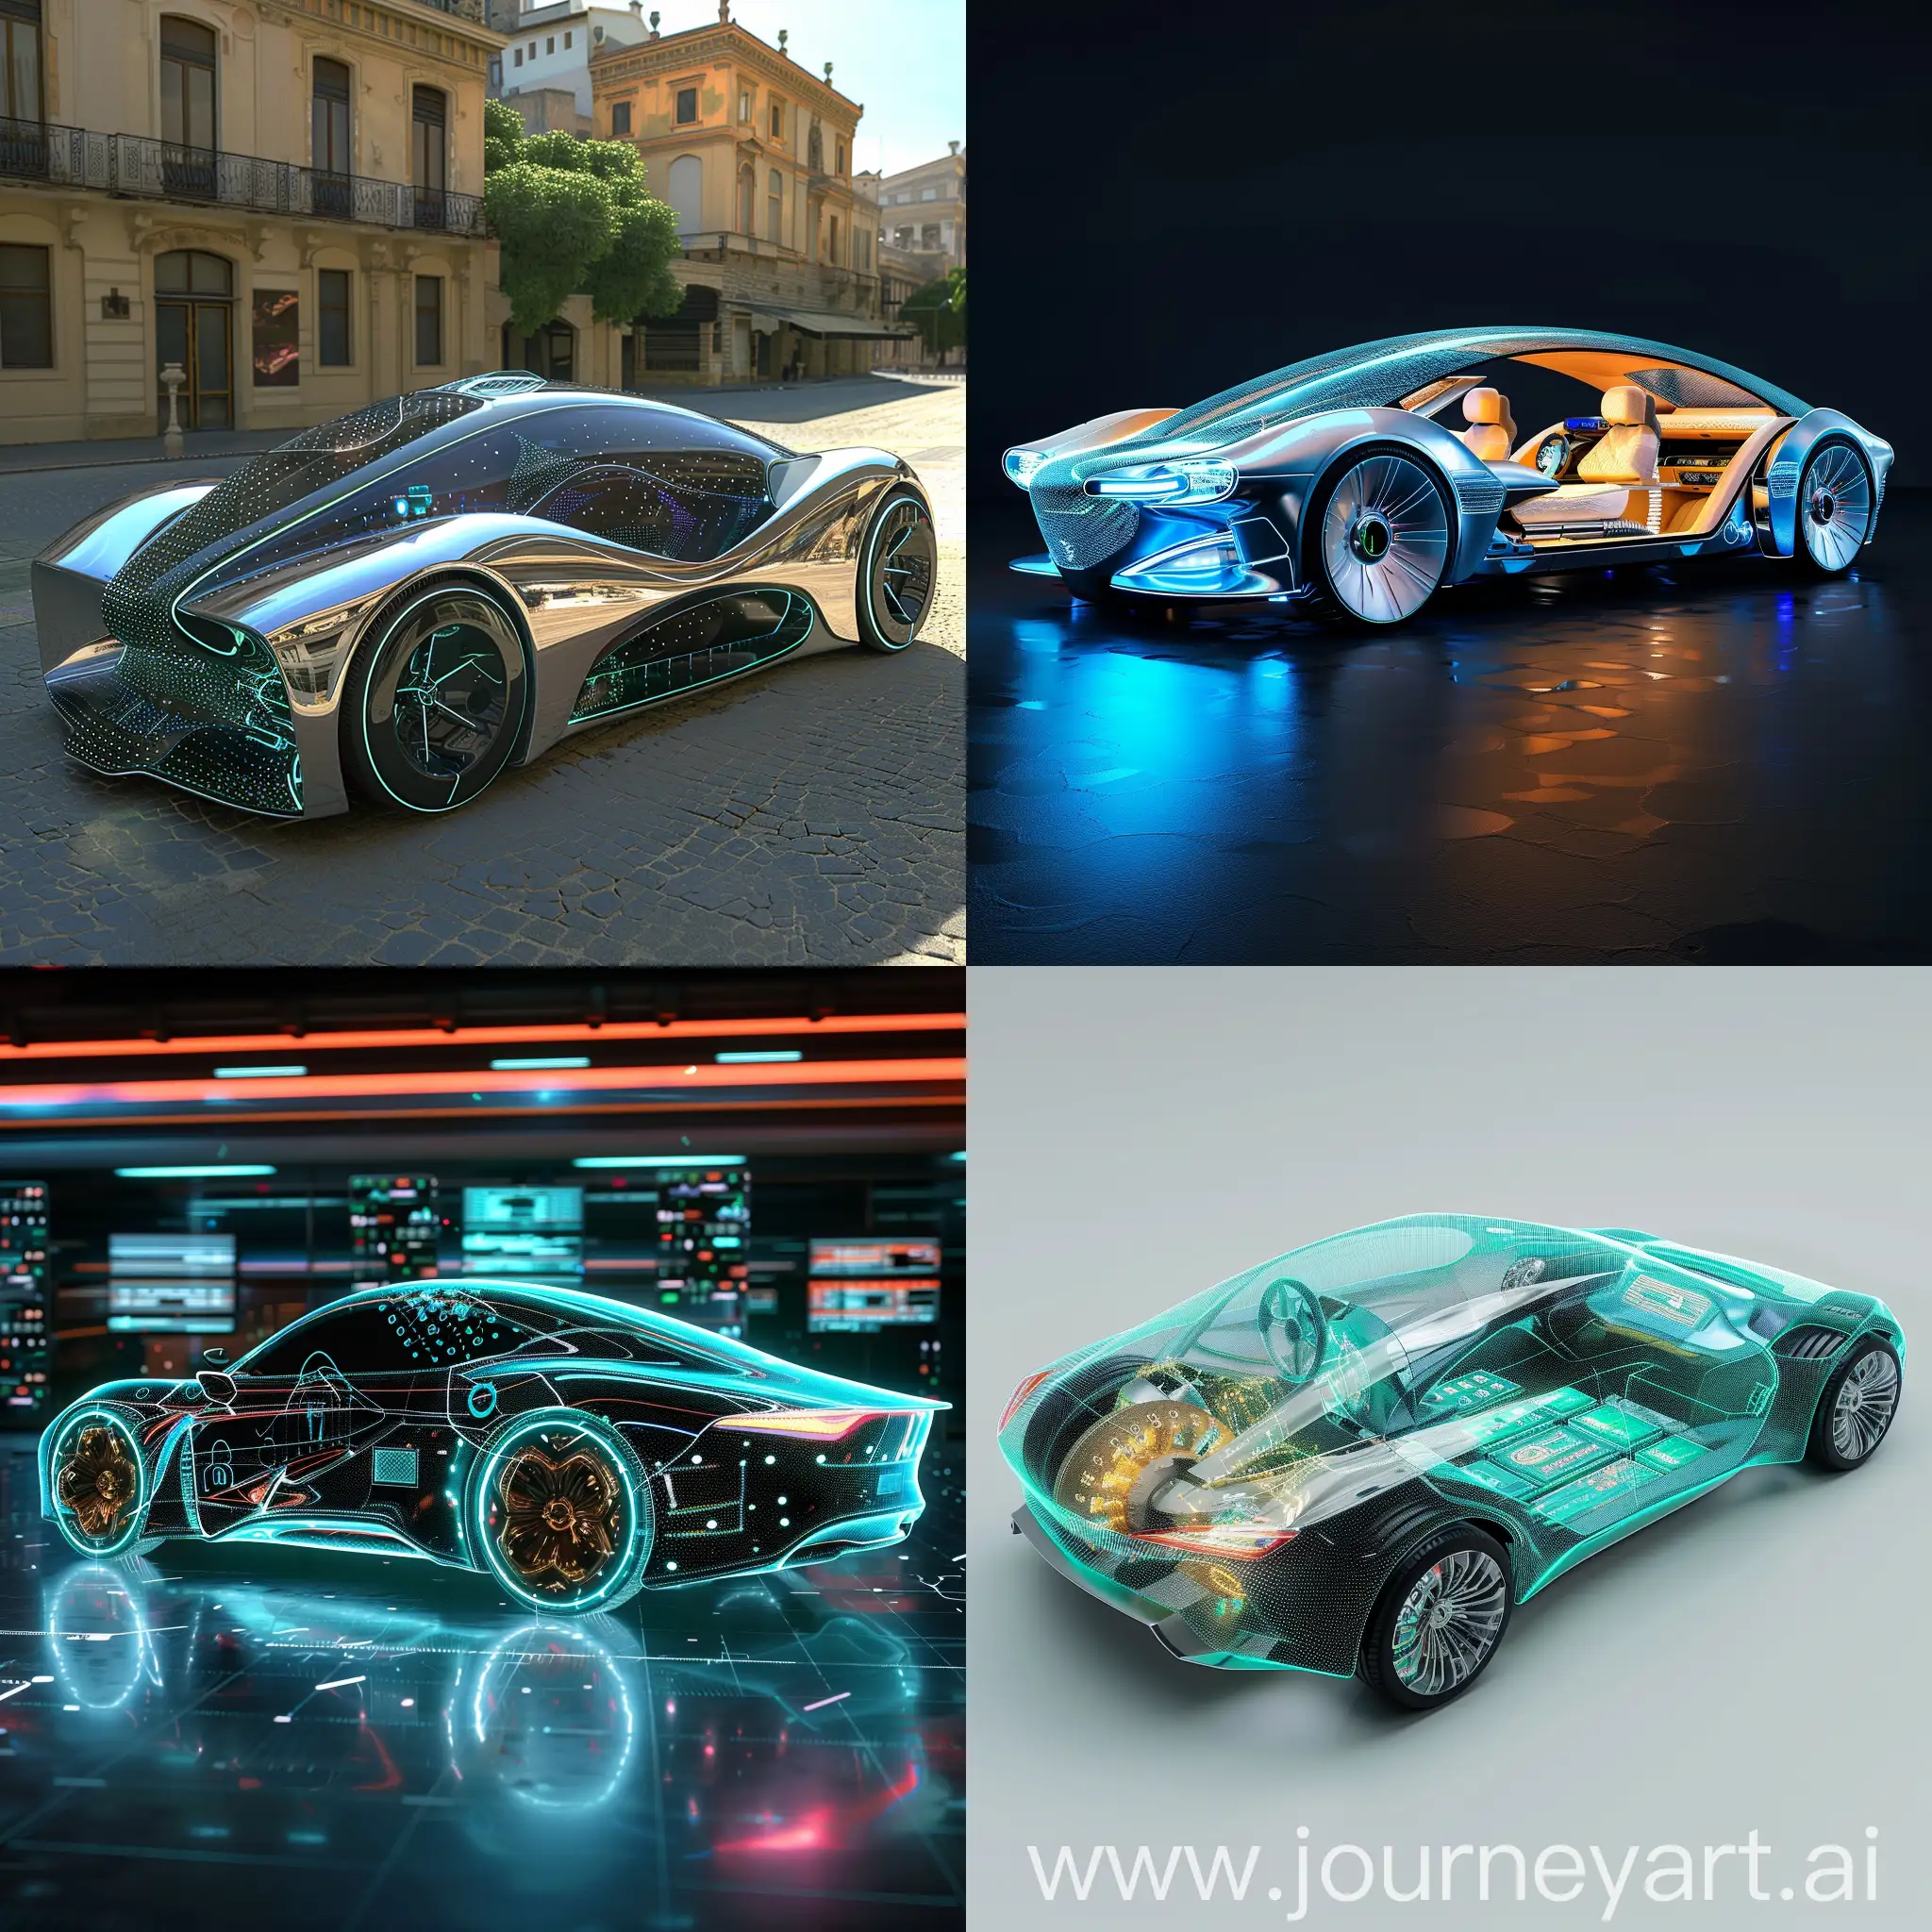 Futuristic-Car-with-Augmented-Reality-Windshields-and-Advanced-Features